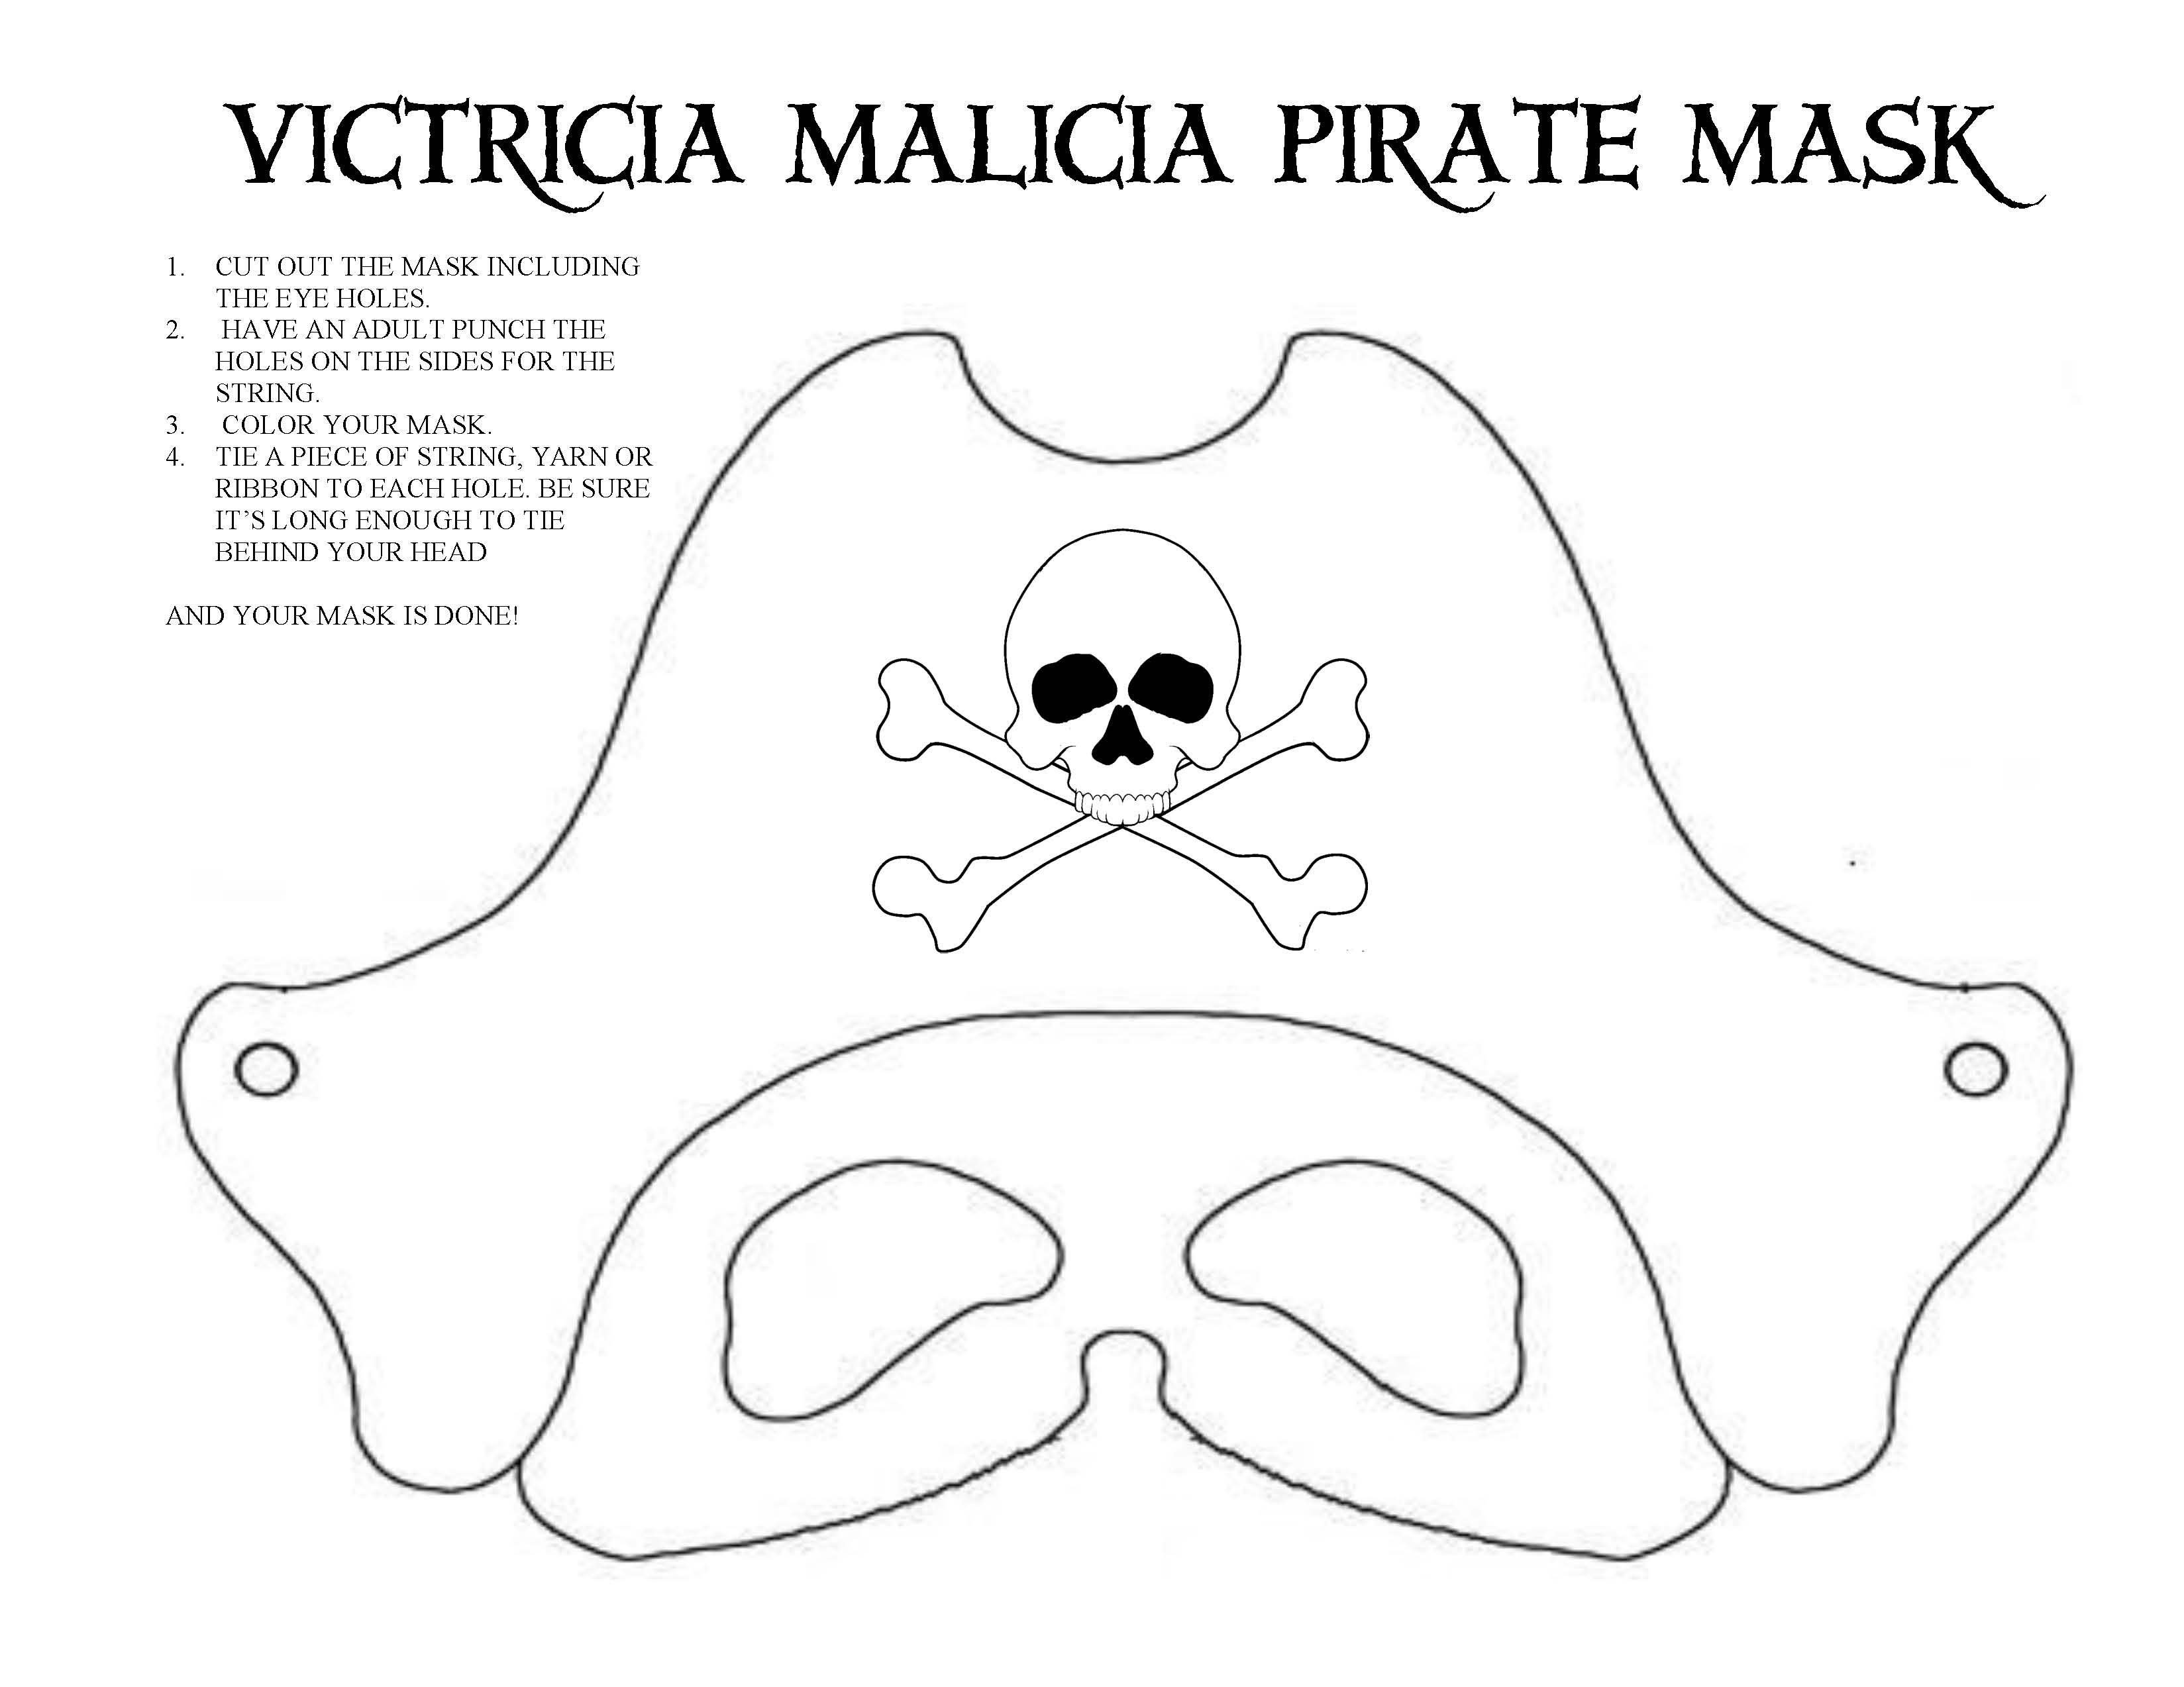 Pirate Mask Template Pin by Carrie Ard On Pirate